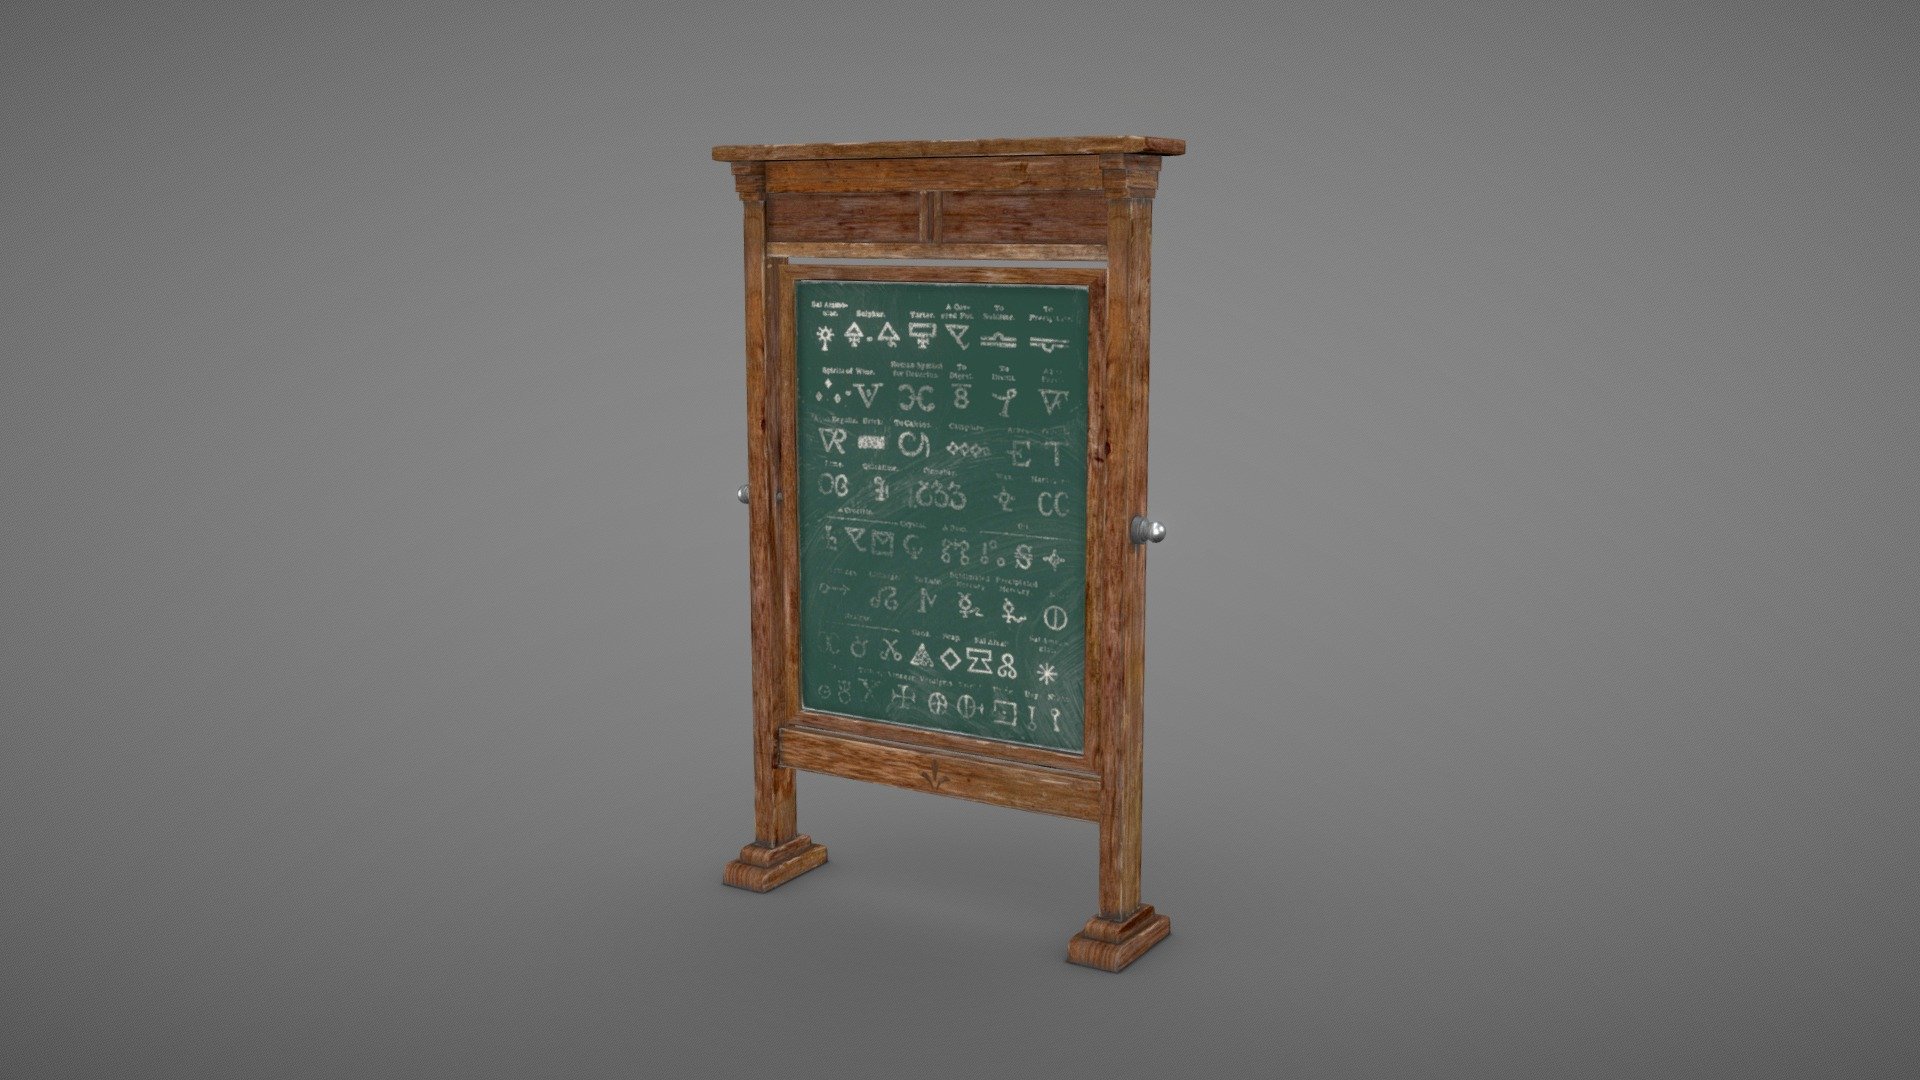 Alchemic board from Harry Potter's potions class - Alchemic board - 3D model by Spark (@sparkb) 3d model